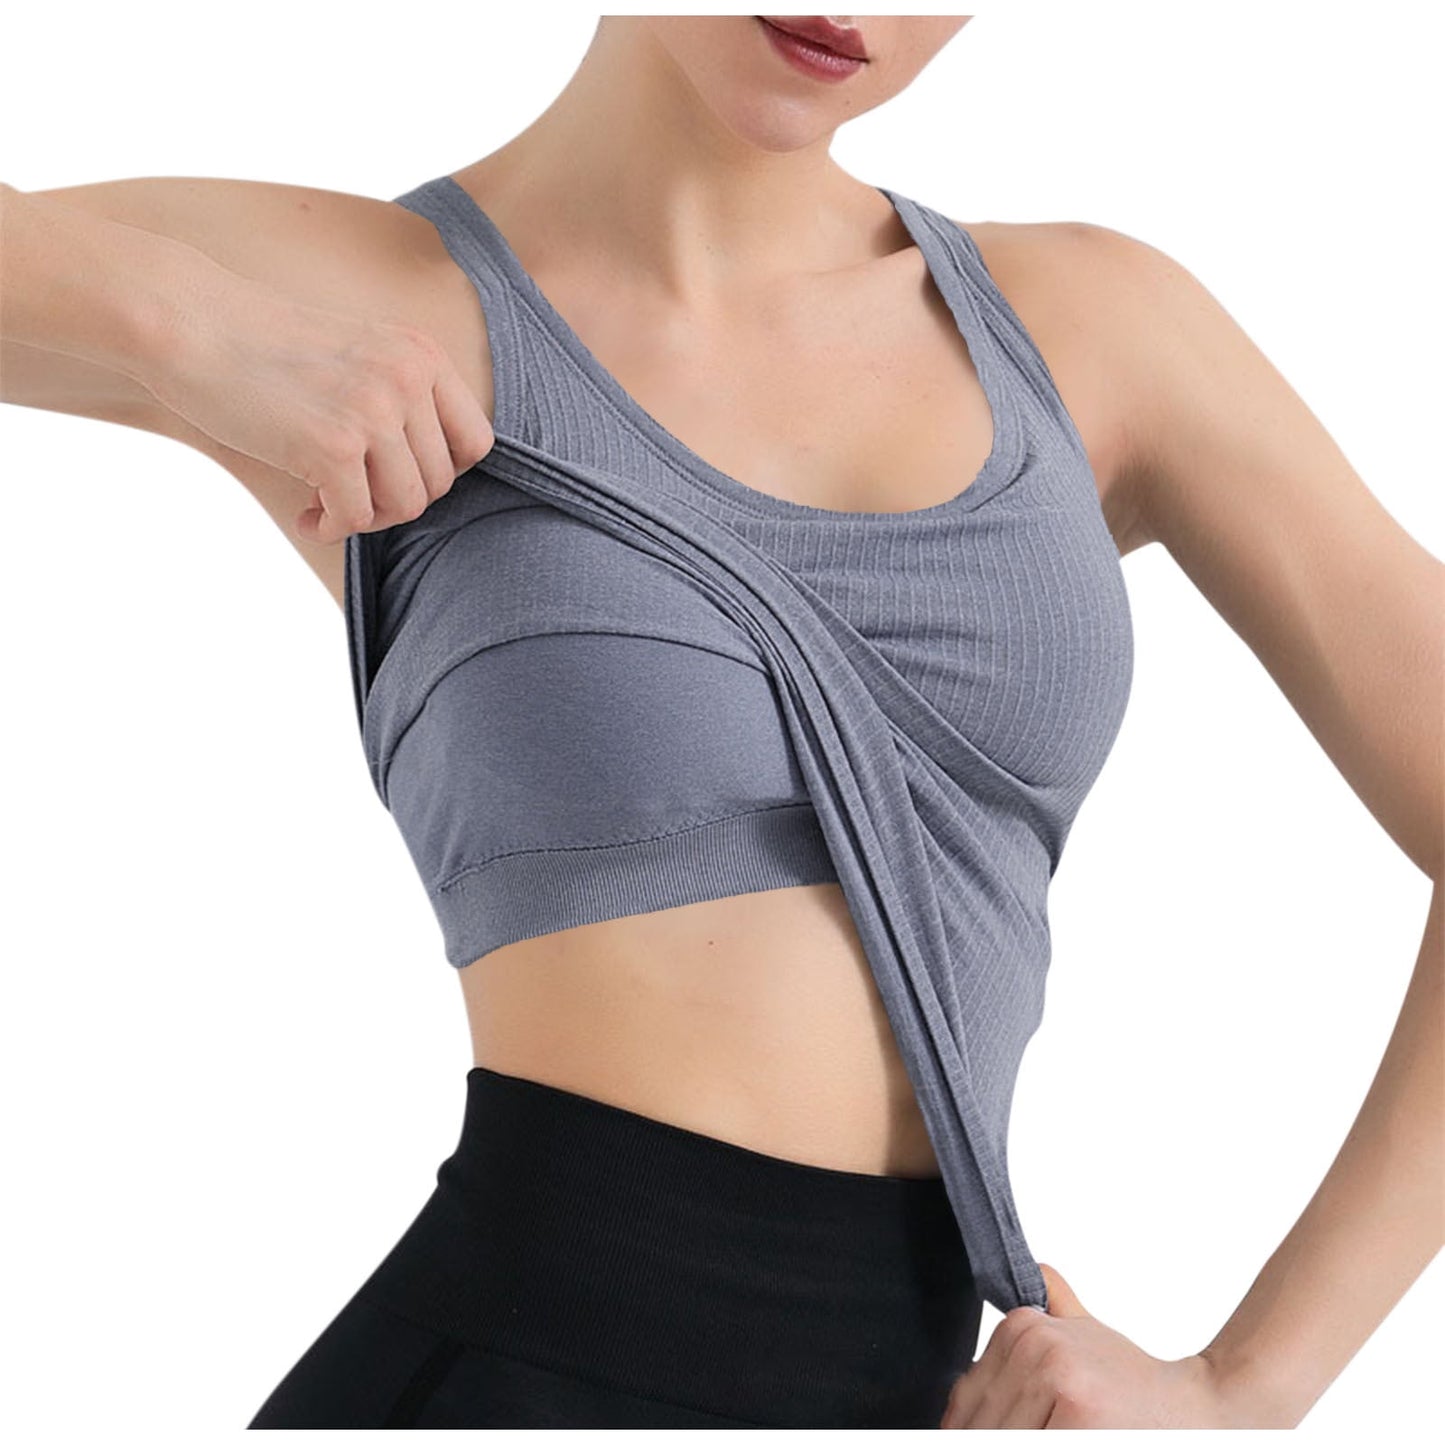 Workout Tank Tops for Women with Built in Bra, Sleeveless Gym Tops Seamless Racerback Athletic Yoga Shirts Running Tank Tops-W